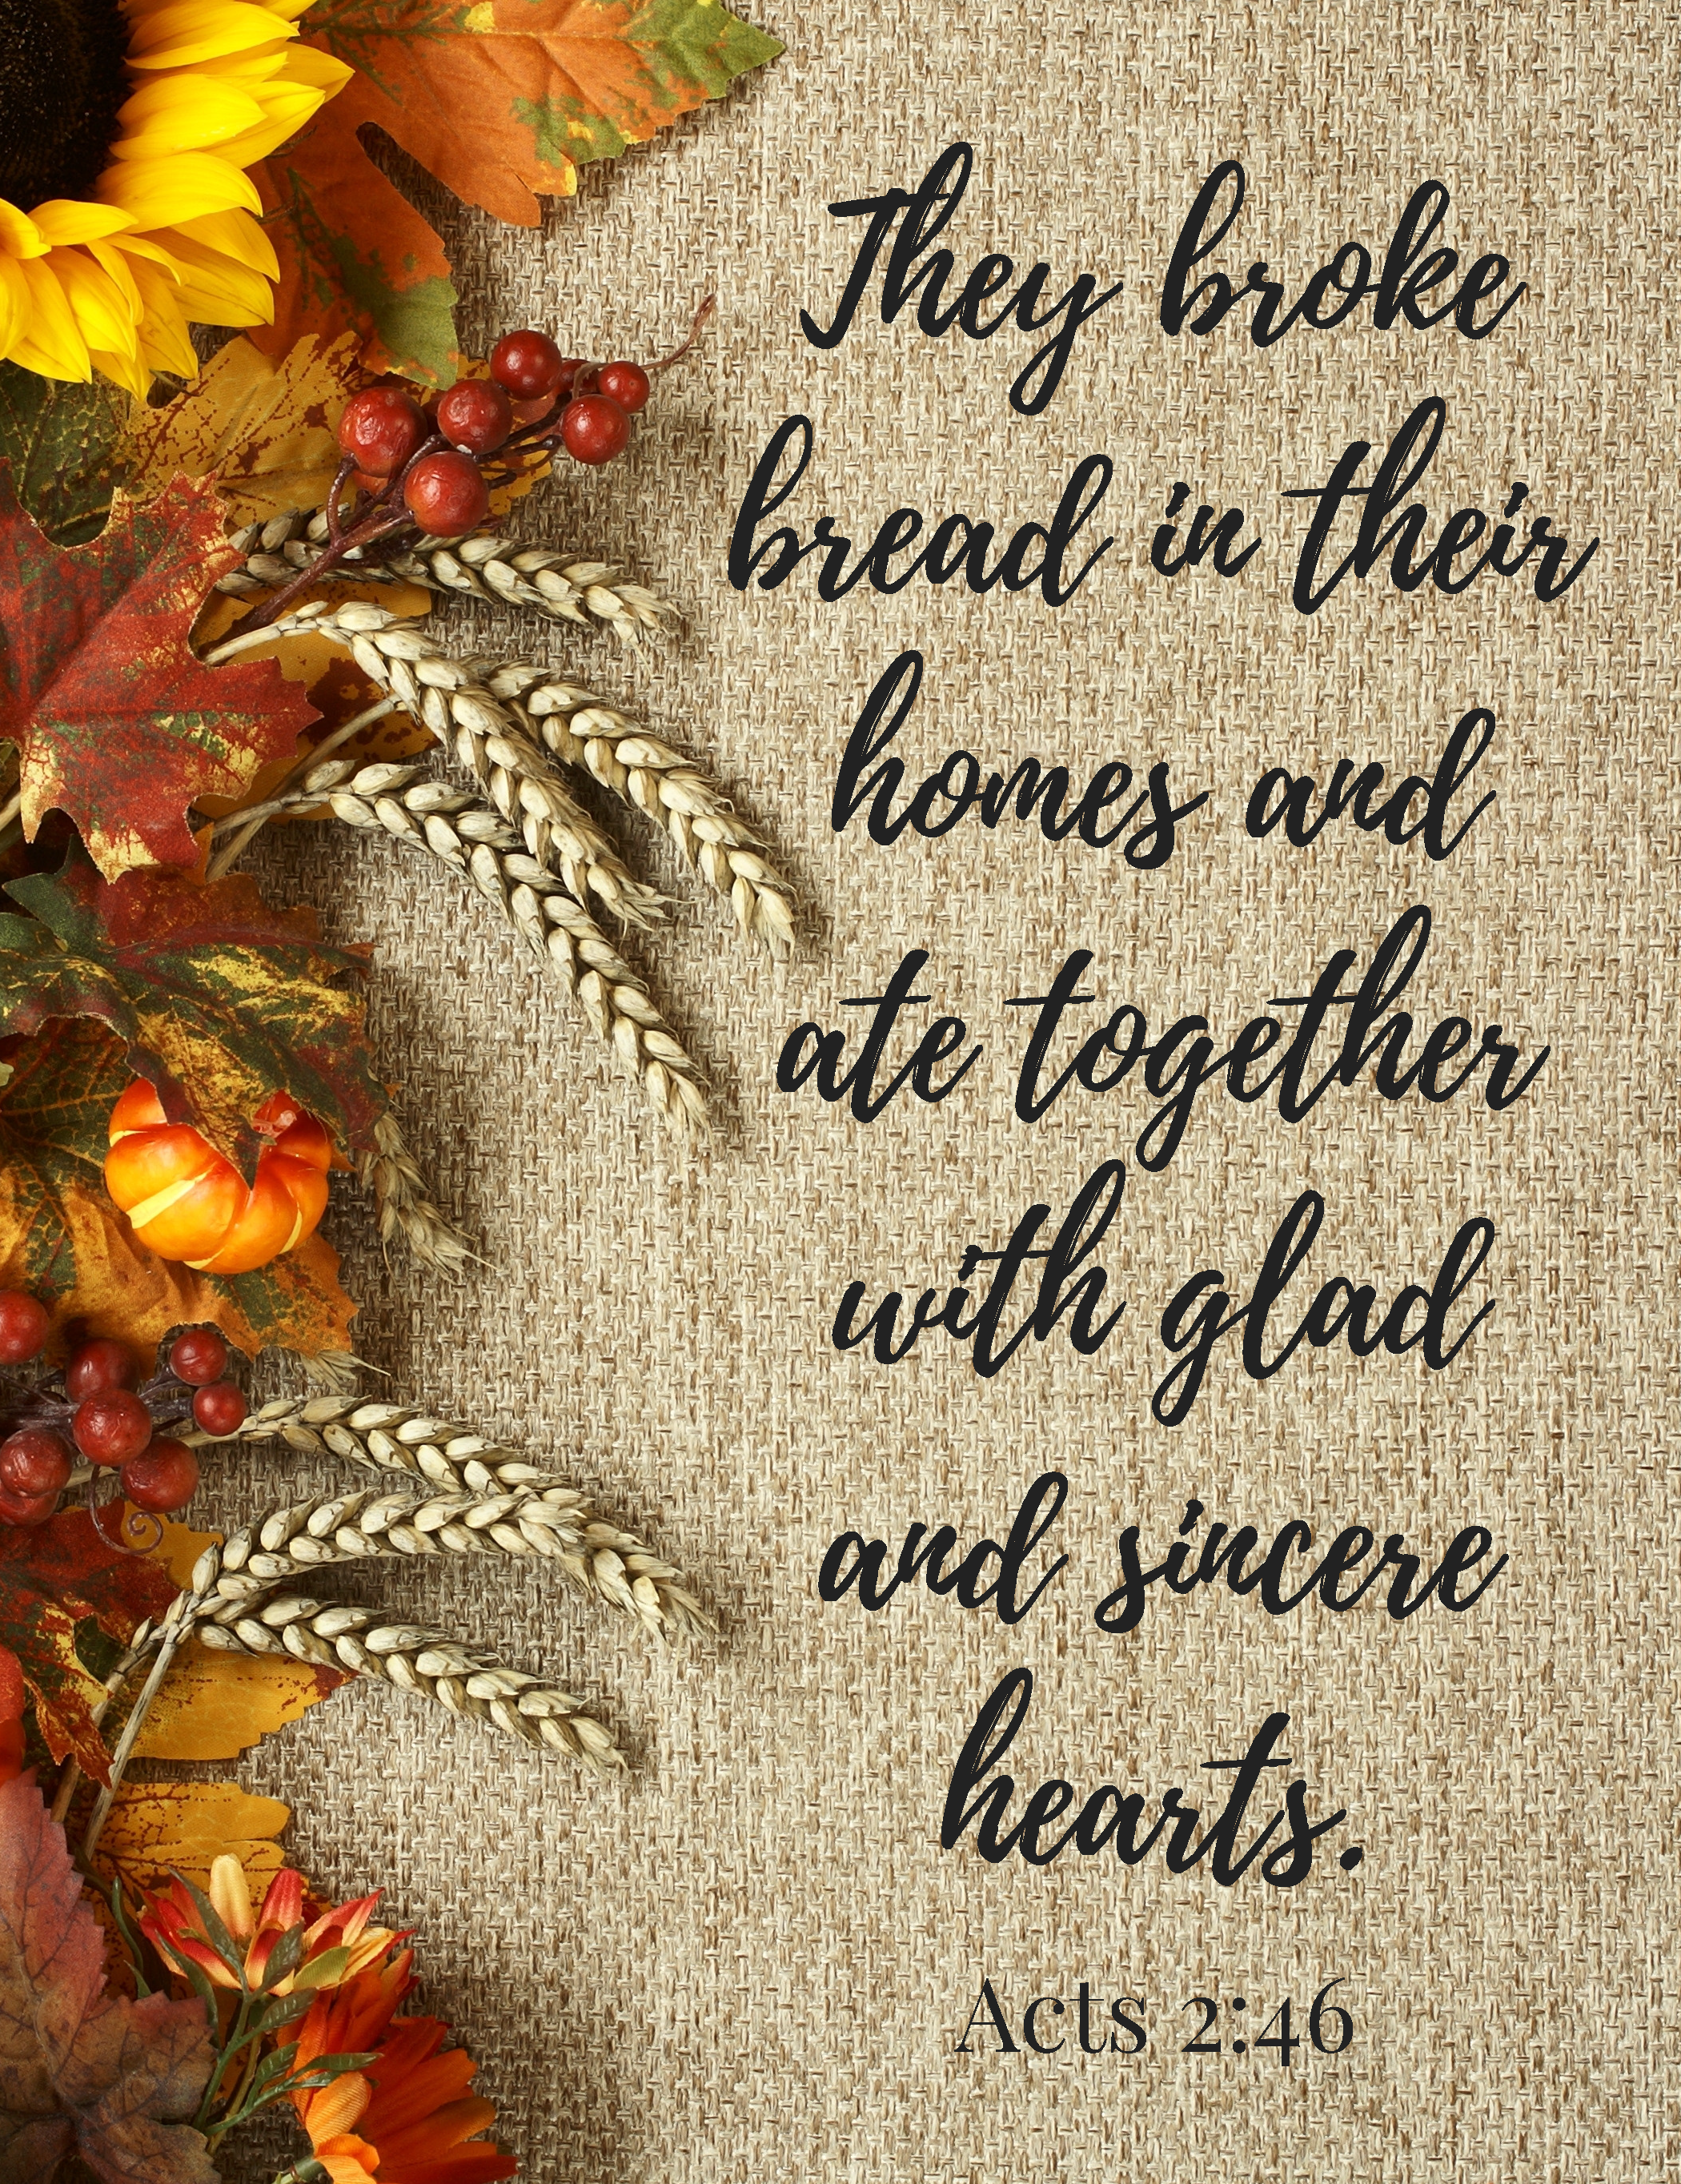 They+broke+bread+in+their+homes+and+ate+together+with+glad+and+sincere+hearts..png